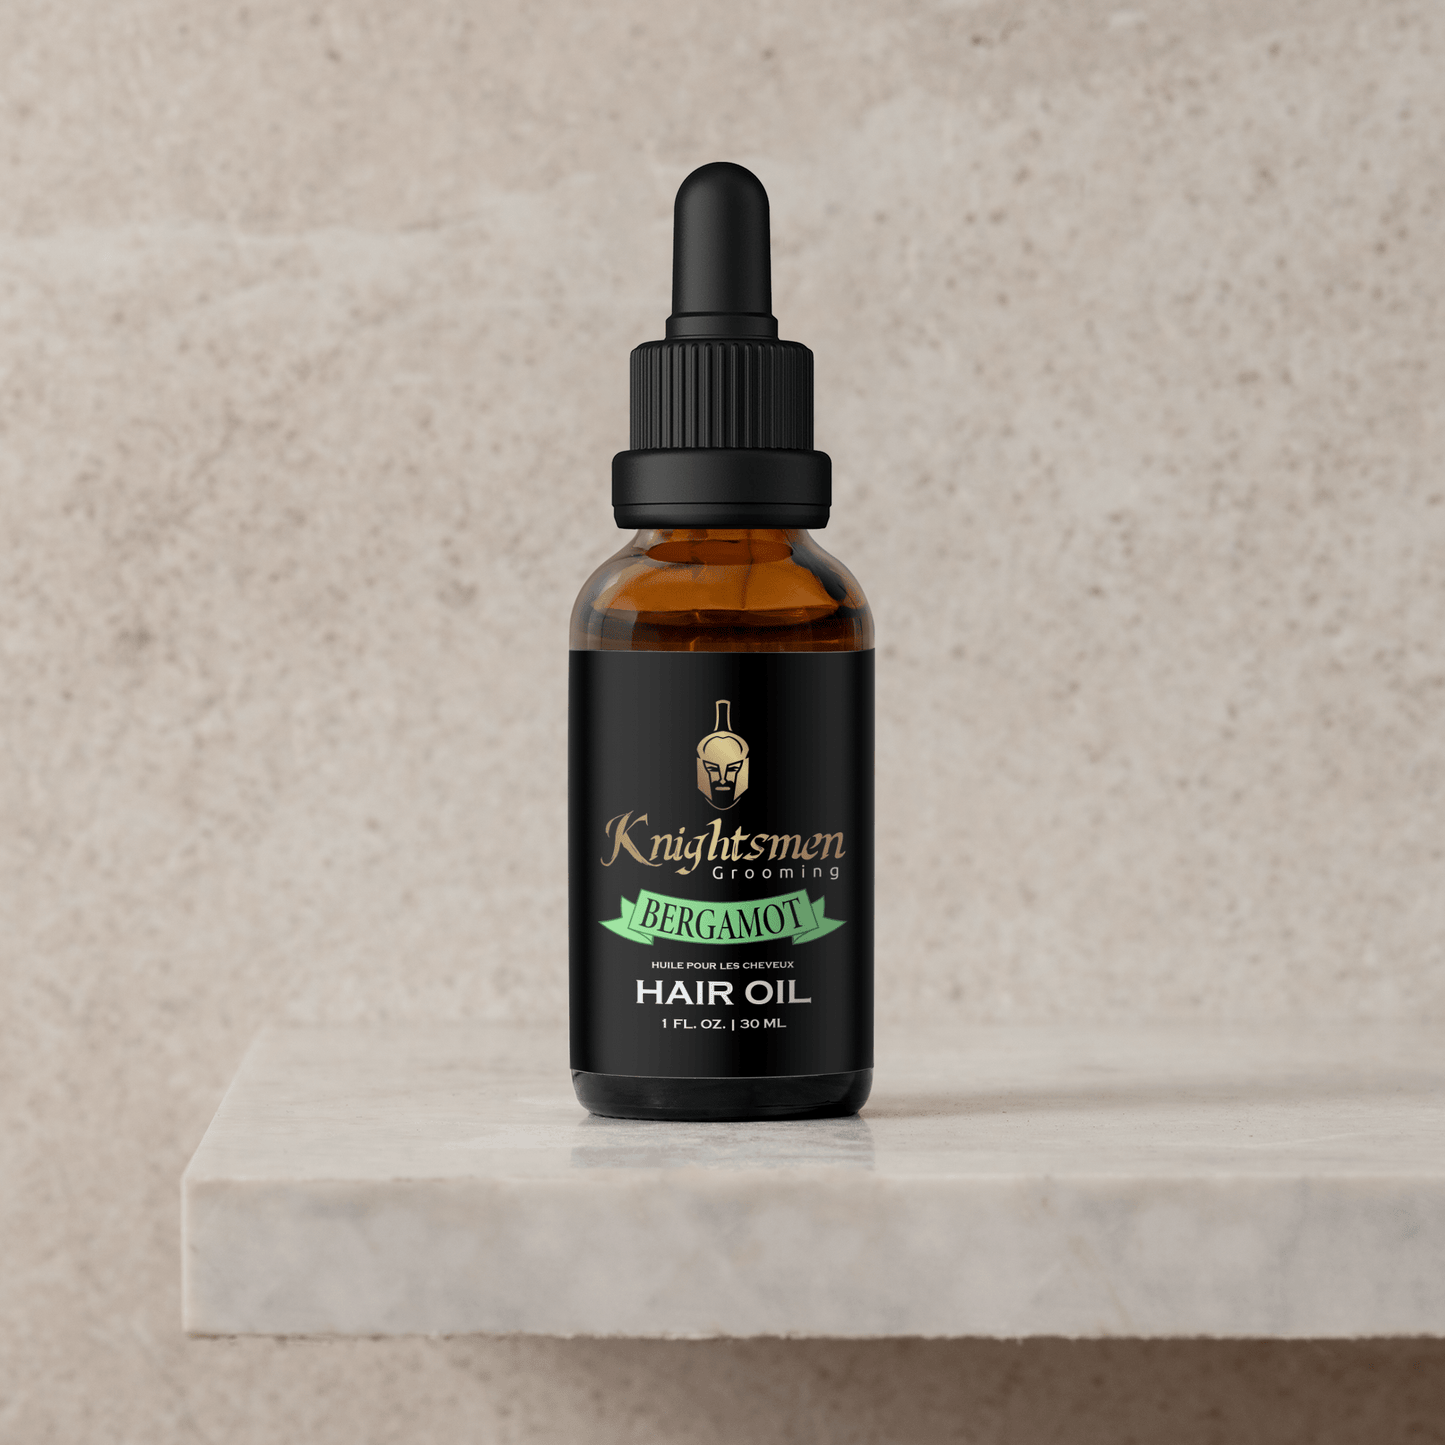 Bergamot Hair Oil and Hair Oil Kit for Hair Growth and Hair Conditioning by Knightsmen Grooming for all hair growth, hair care, hair conditioning, hair softener, hair serum, hair growth formula, hair oil recipe, hair oil, organic hair oil, scented hair oil, best hair oil, hair oil canada, hair oil toronto, hair oil for men